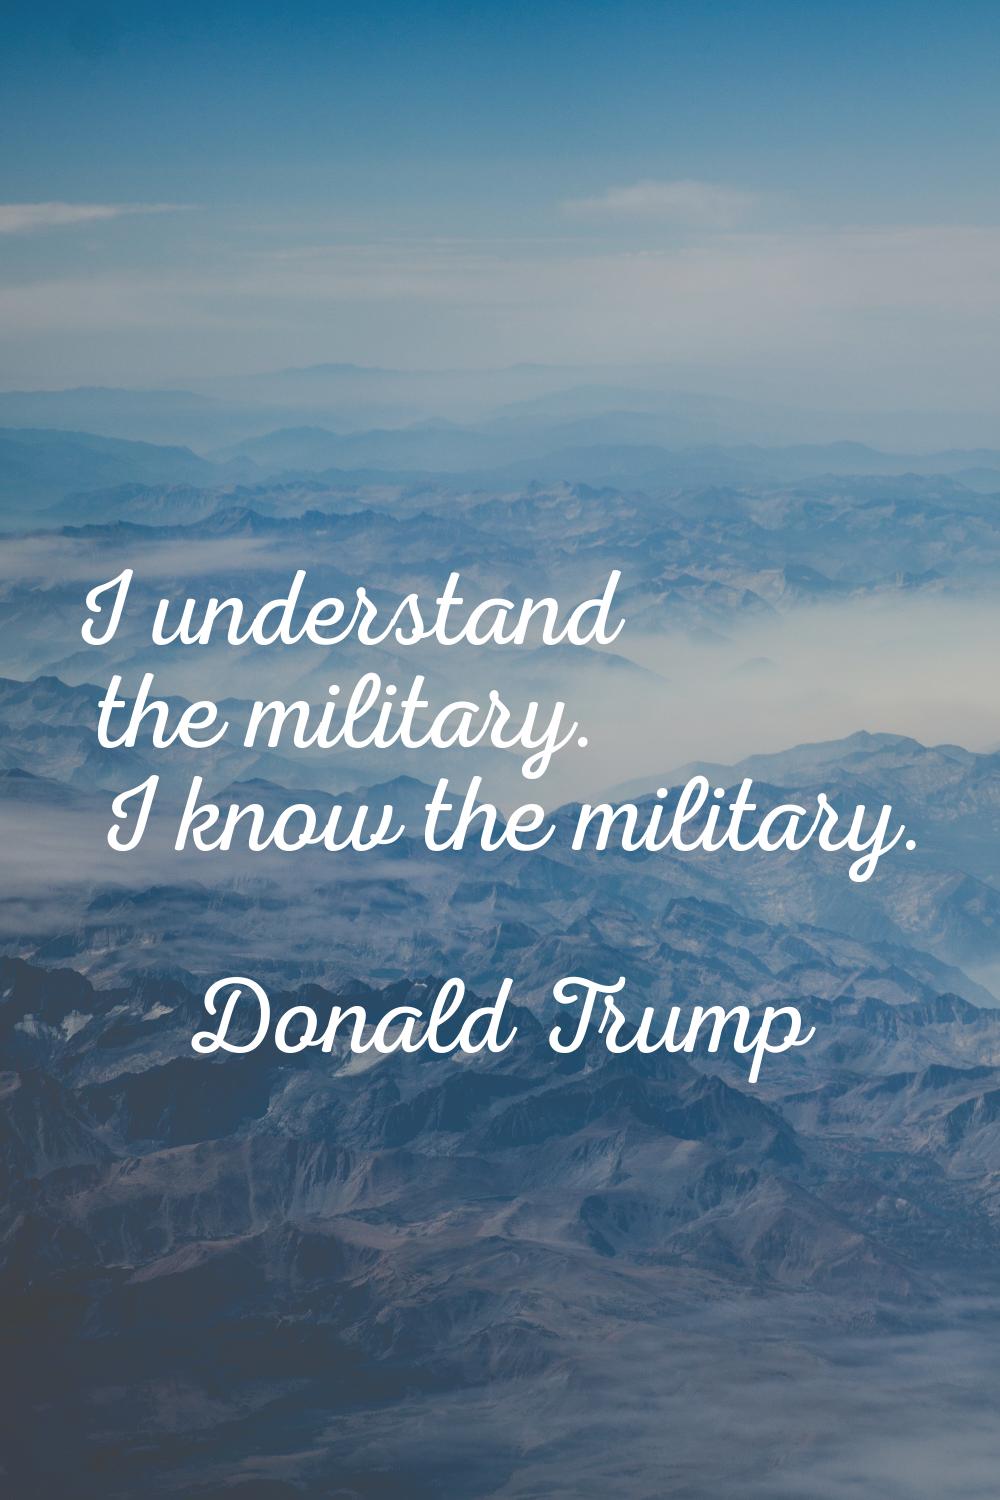 I understand the military. I know the military.